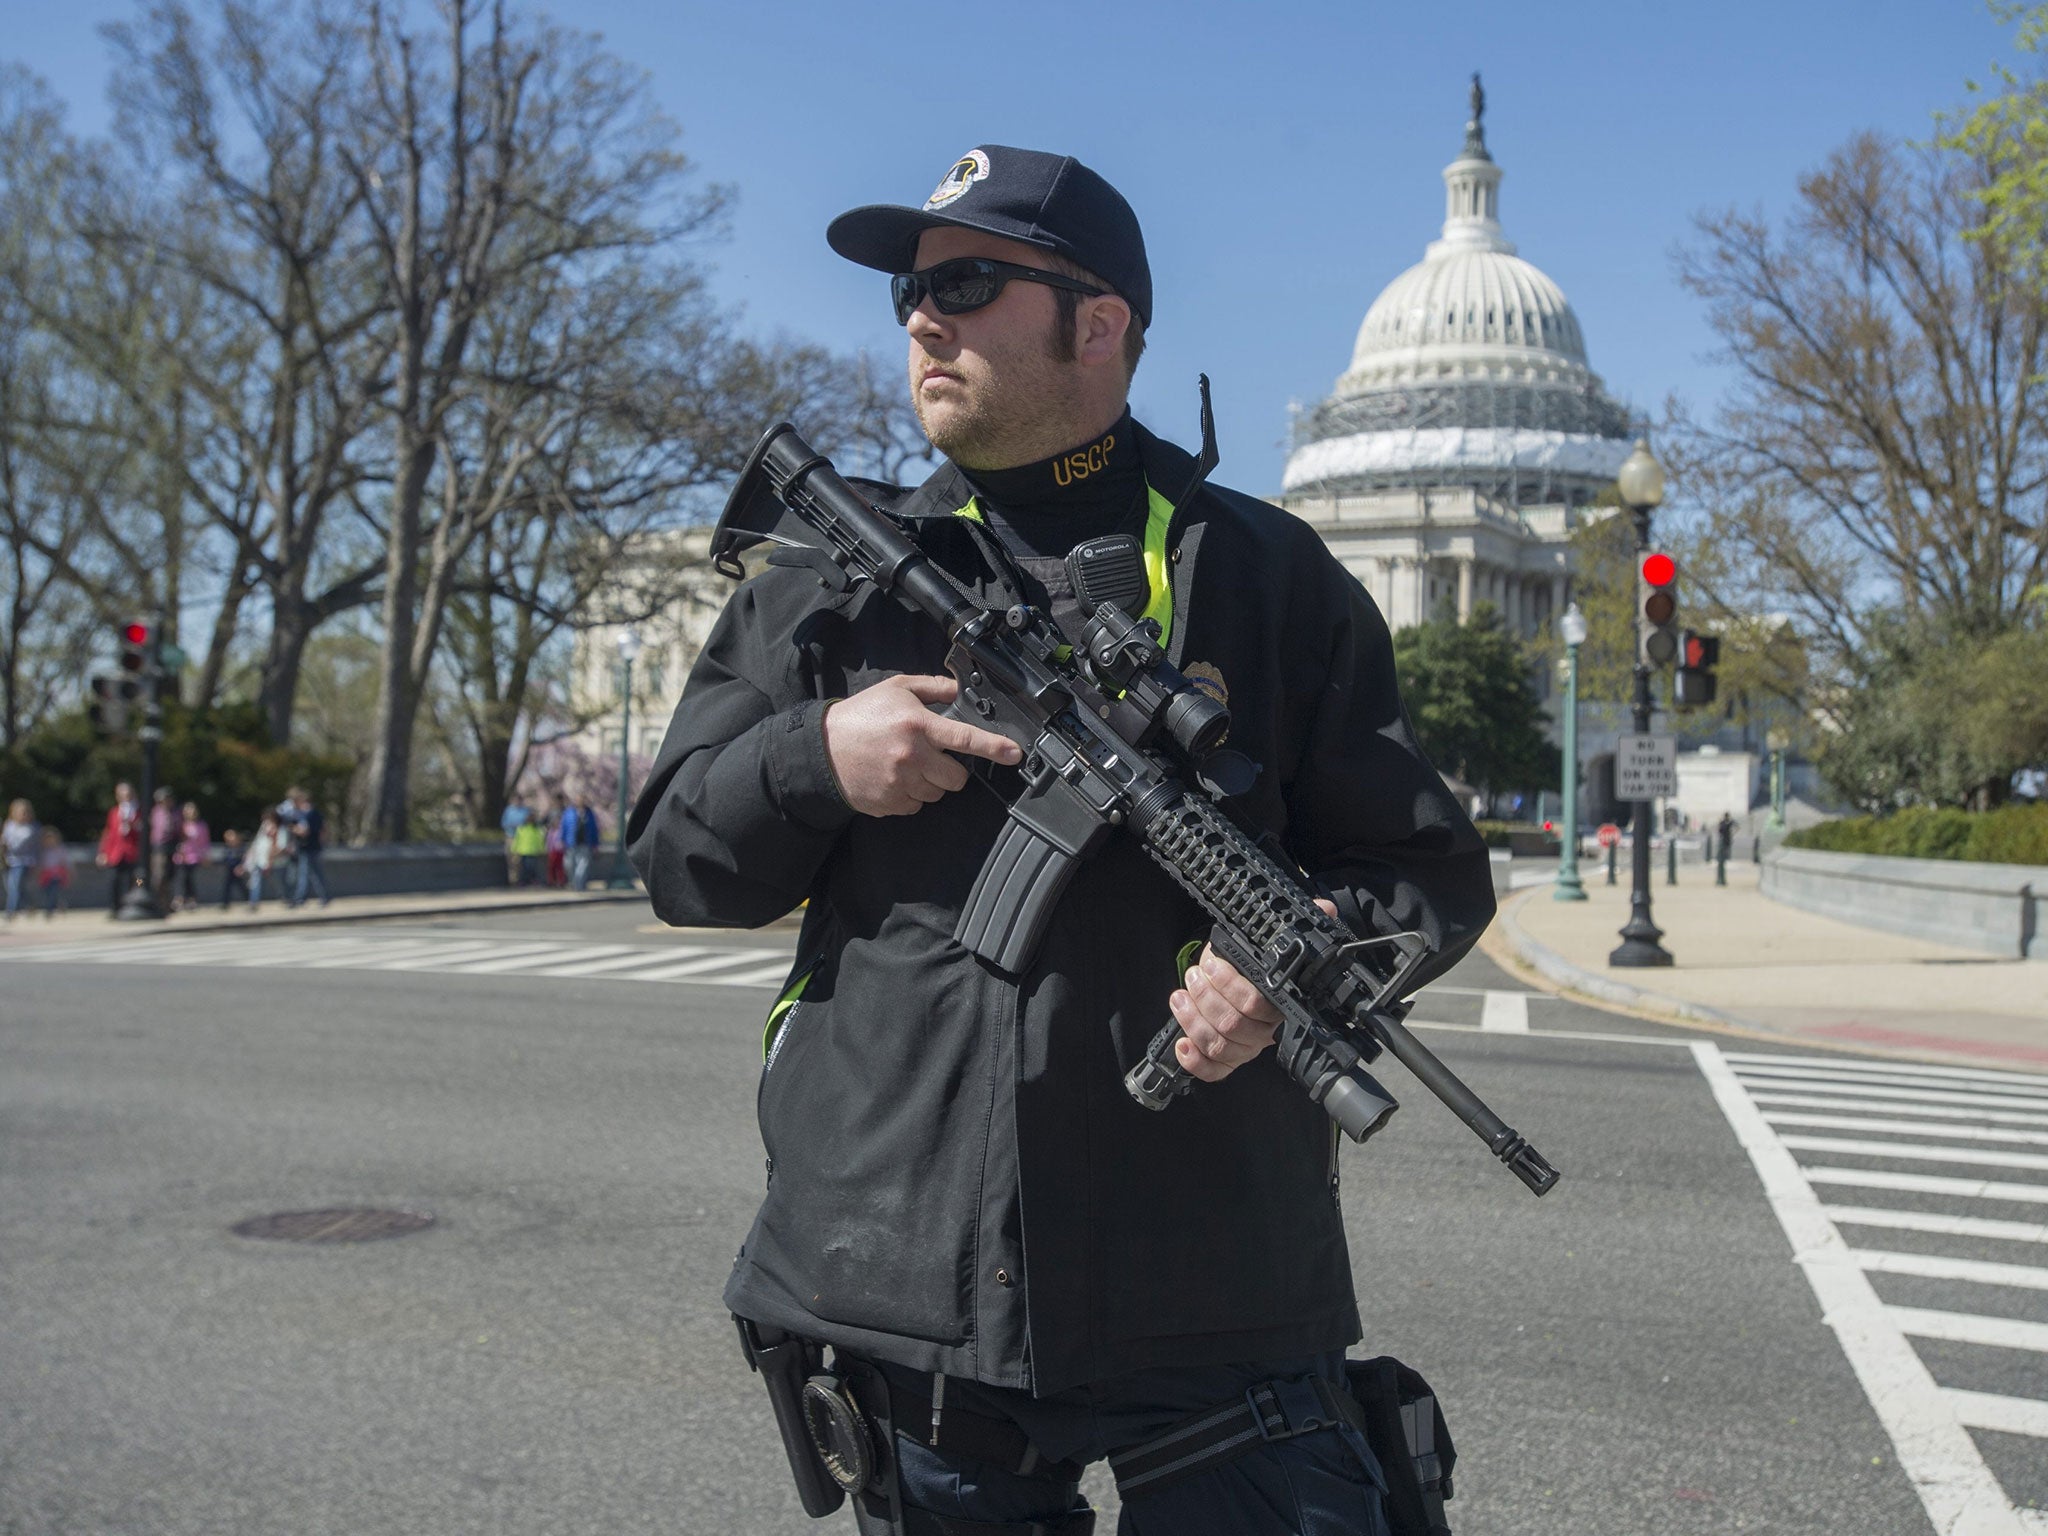 A Capitol police officer secures the area after a man opened fire at the complex